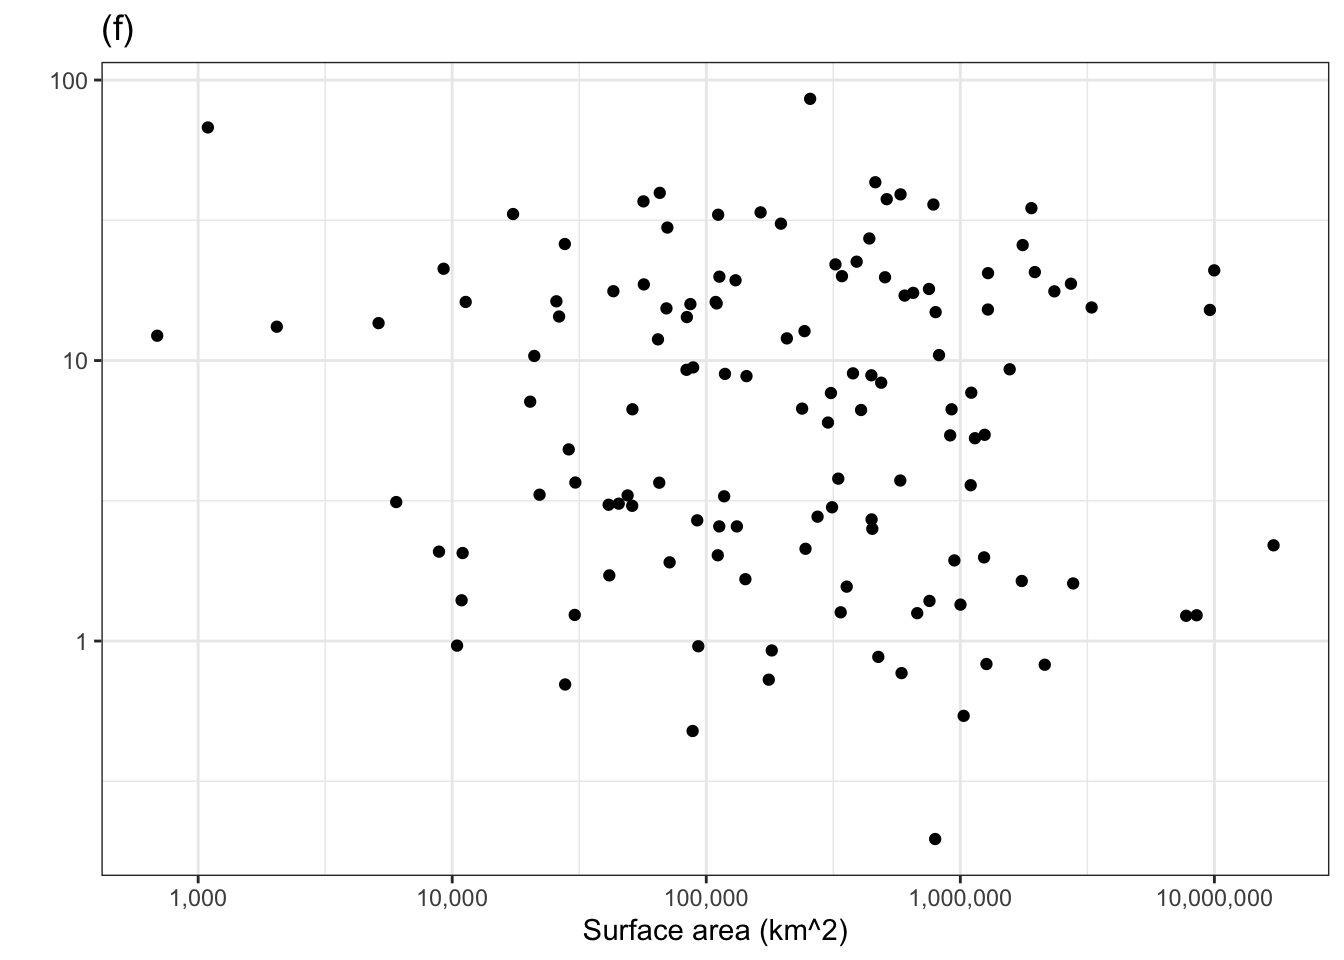 Murder rate versus country surface area. One of the panels shows the actual data. The others show shuffled data with no systematic covariation between murder rate and surface area. Can you pick the actual data out of the line-up?